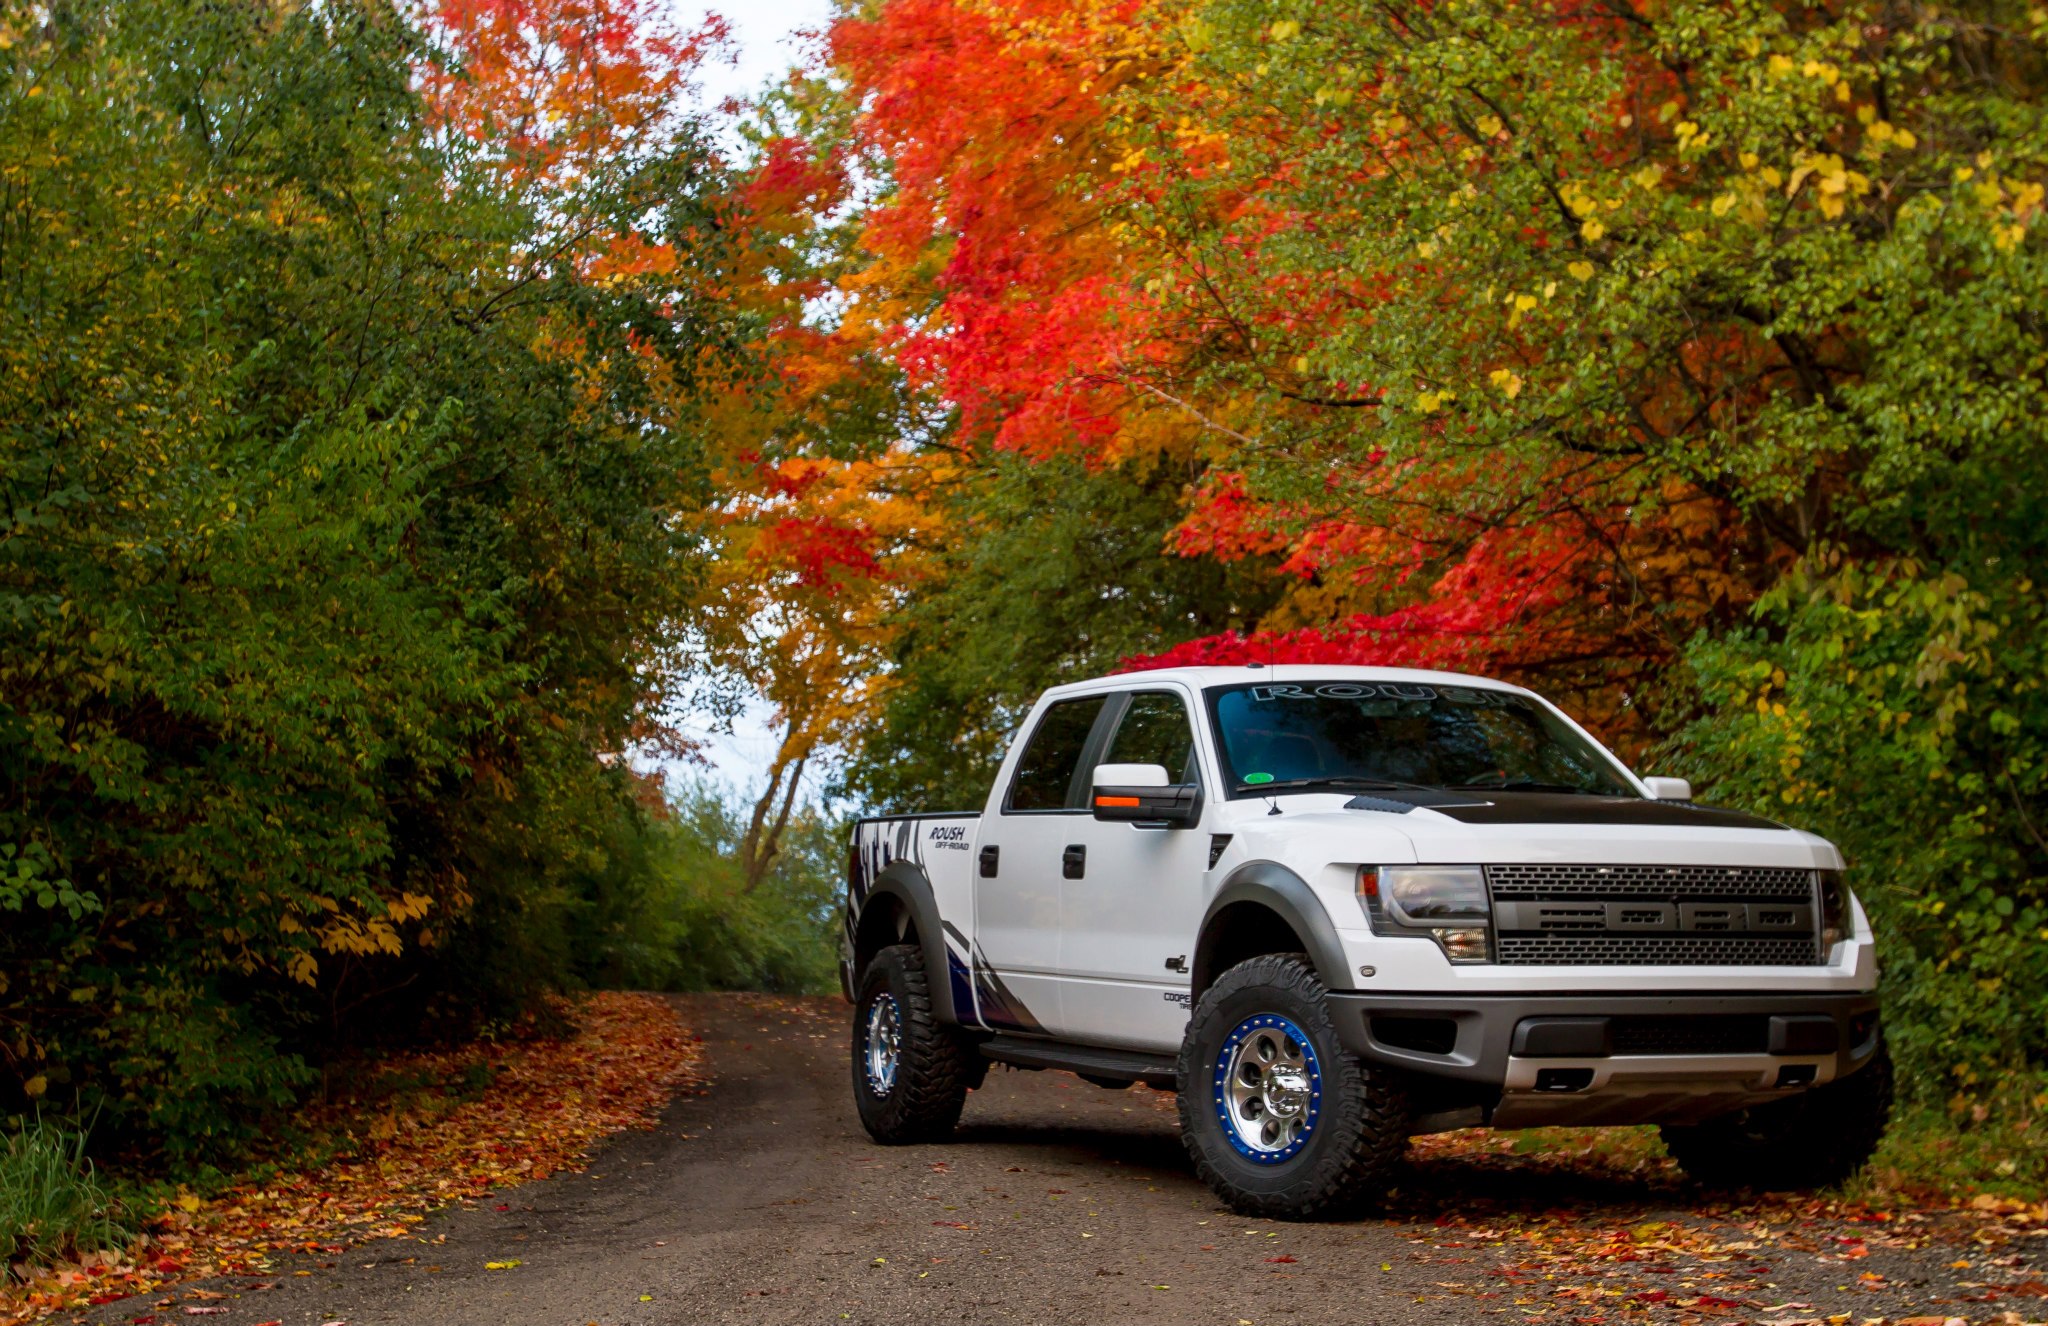 2012, Roush, Performance, Ford, Raptor, Phase 2, Offroad, 4x4, Tuning Wallpaper